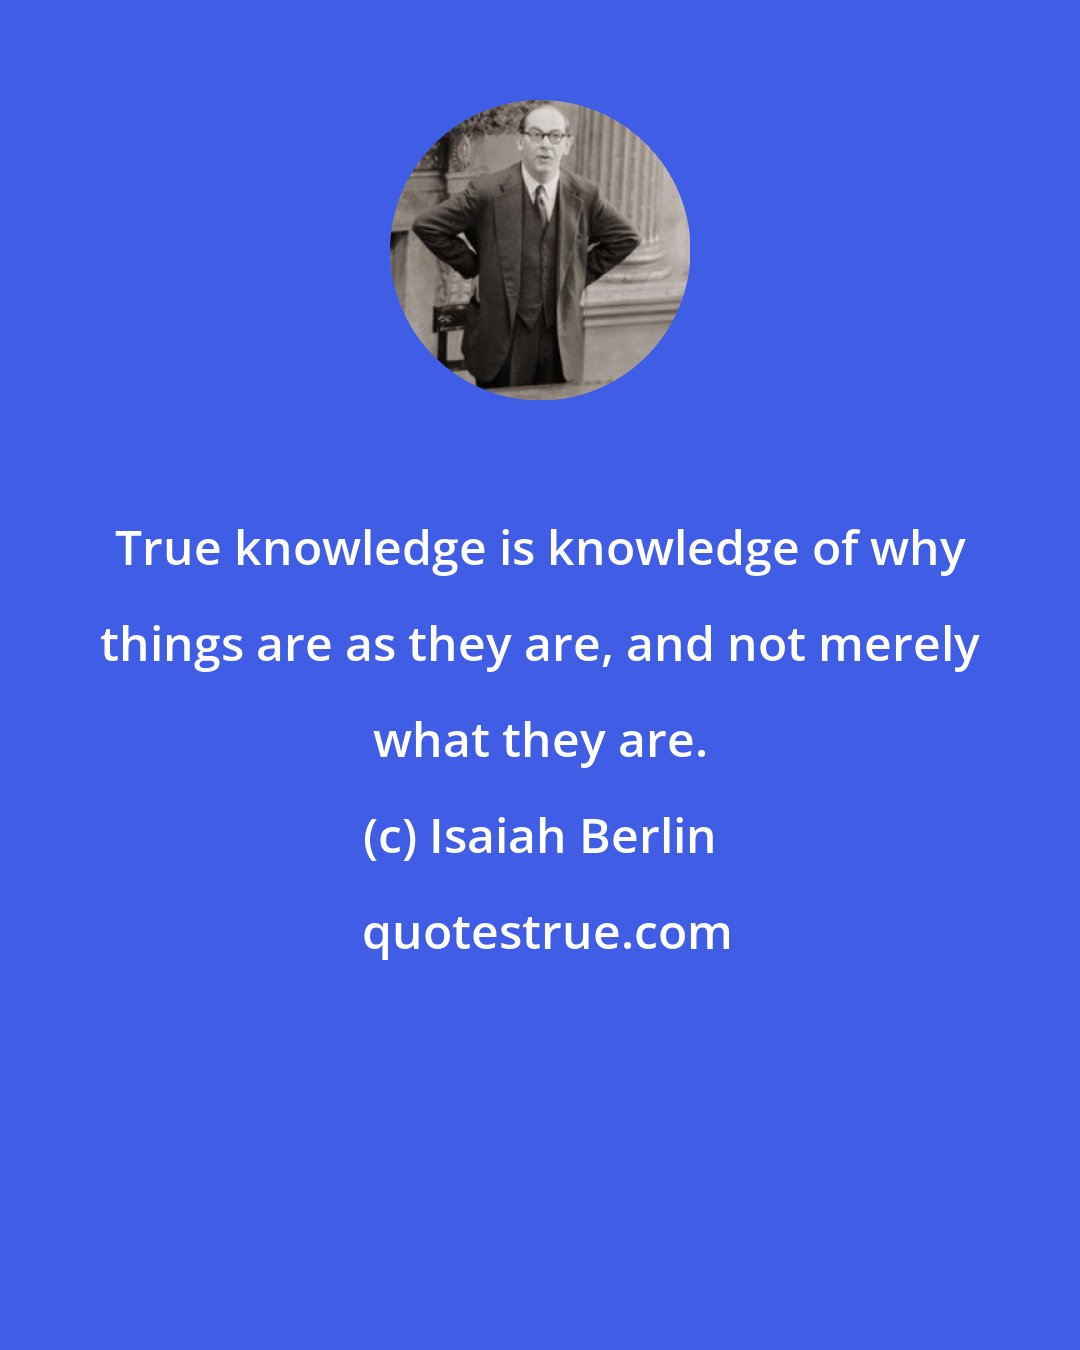 Isaiah Berlin: True knowledge is knowledge of why things are as they are, and not merely what they are.